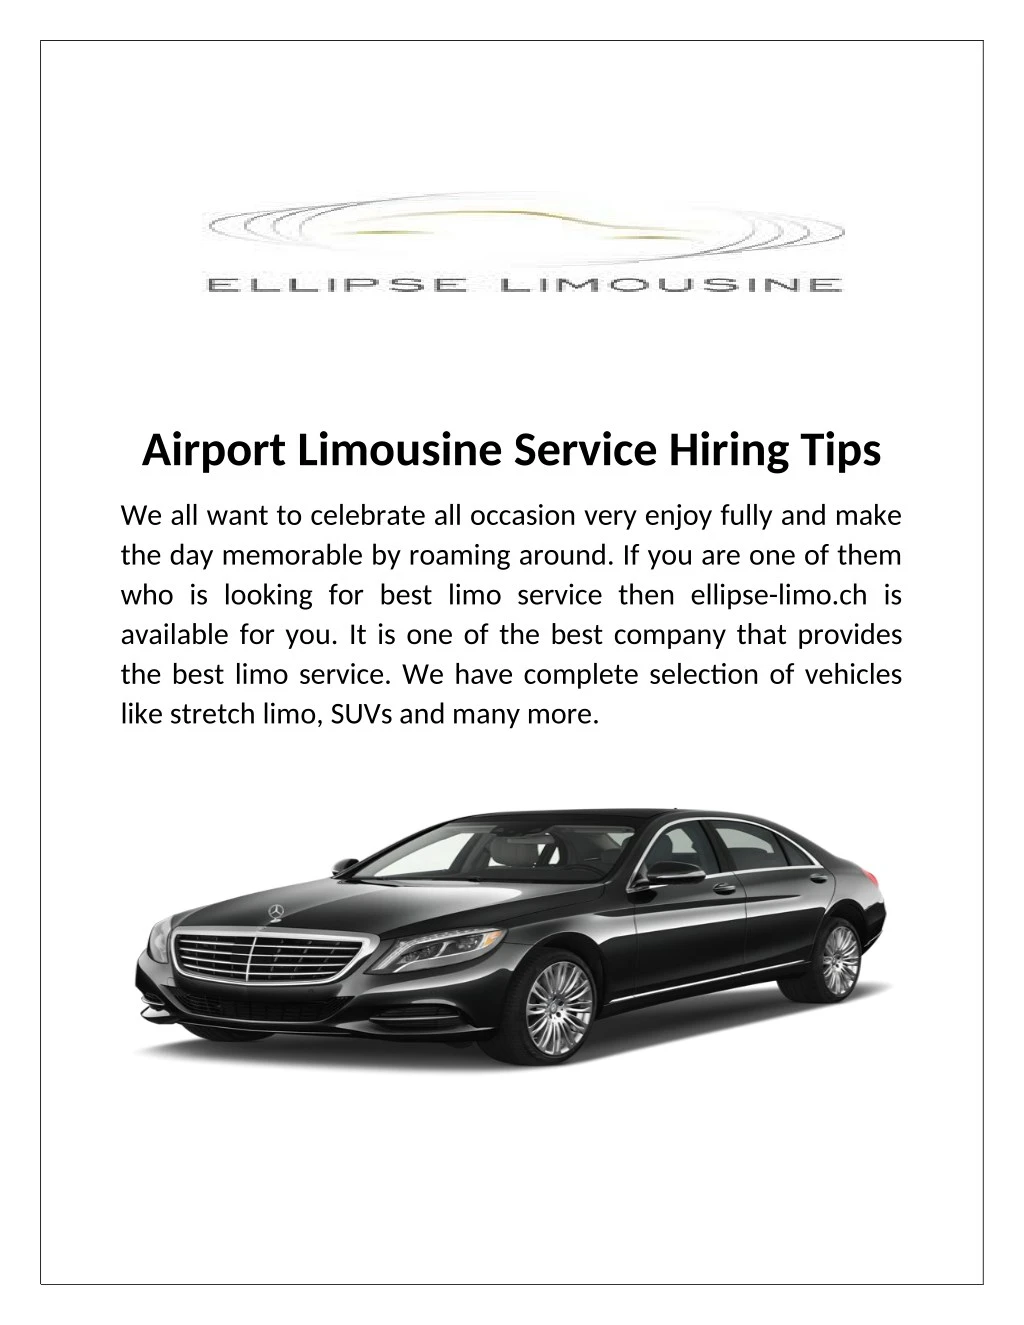 airport limousine service hiring tips